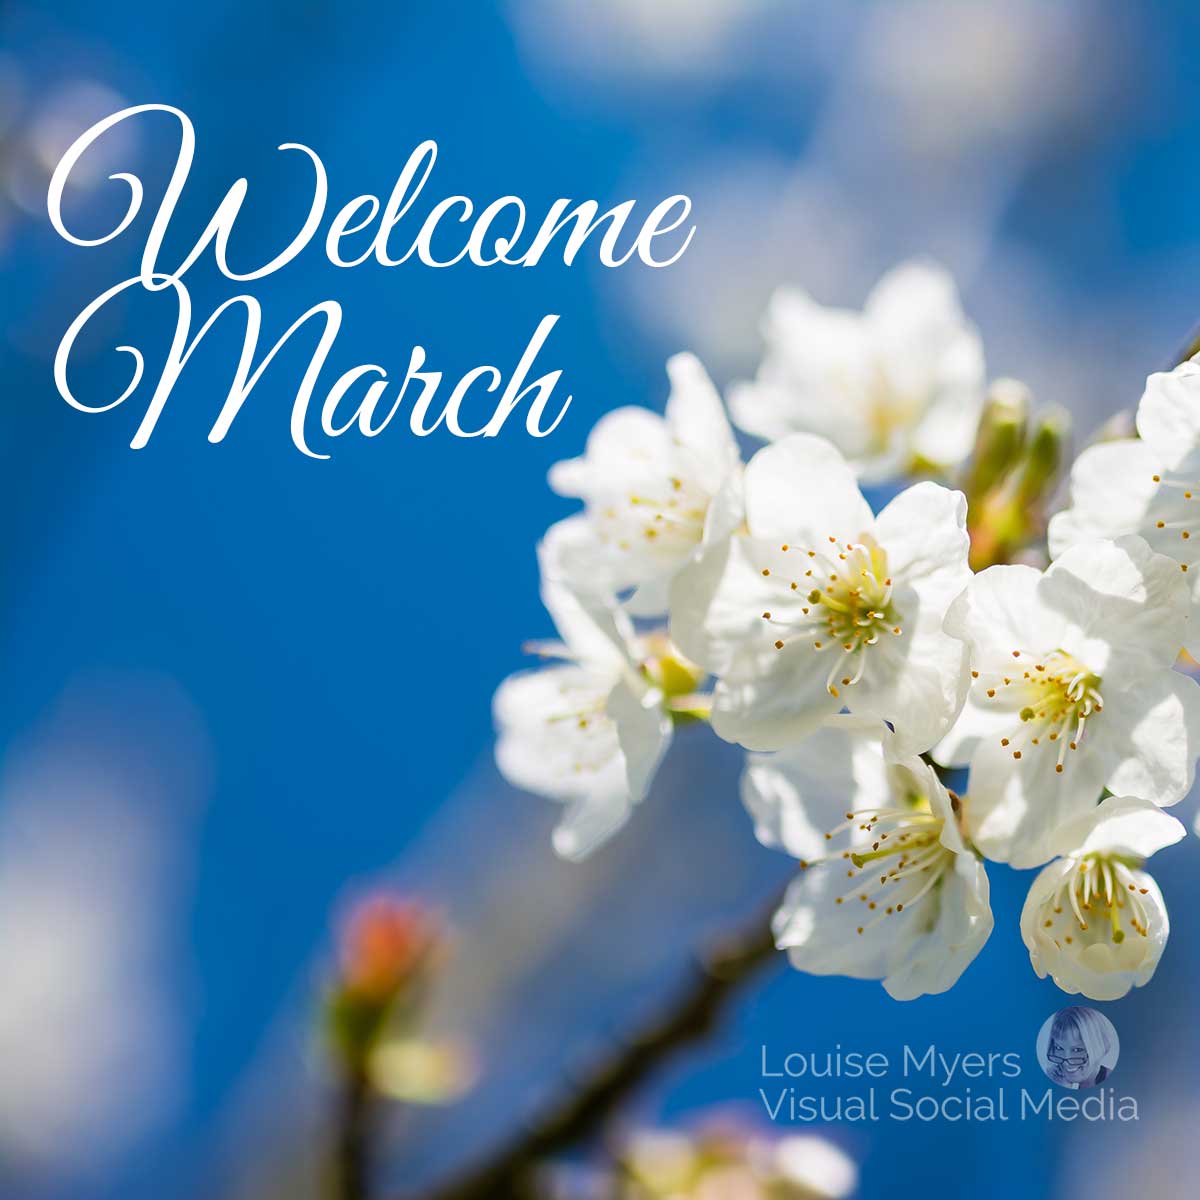 welcome march on photo of blossoming tree.